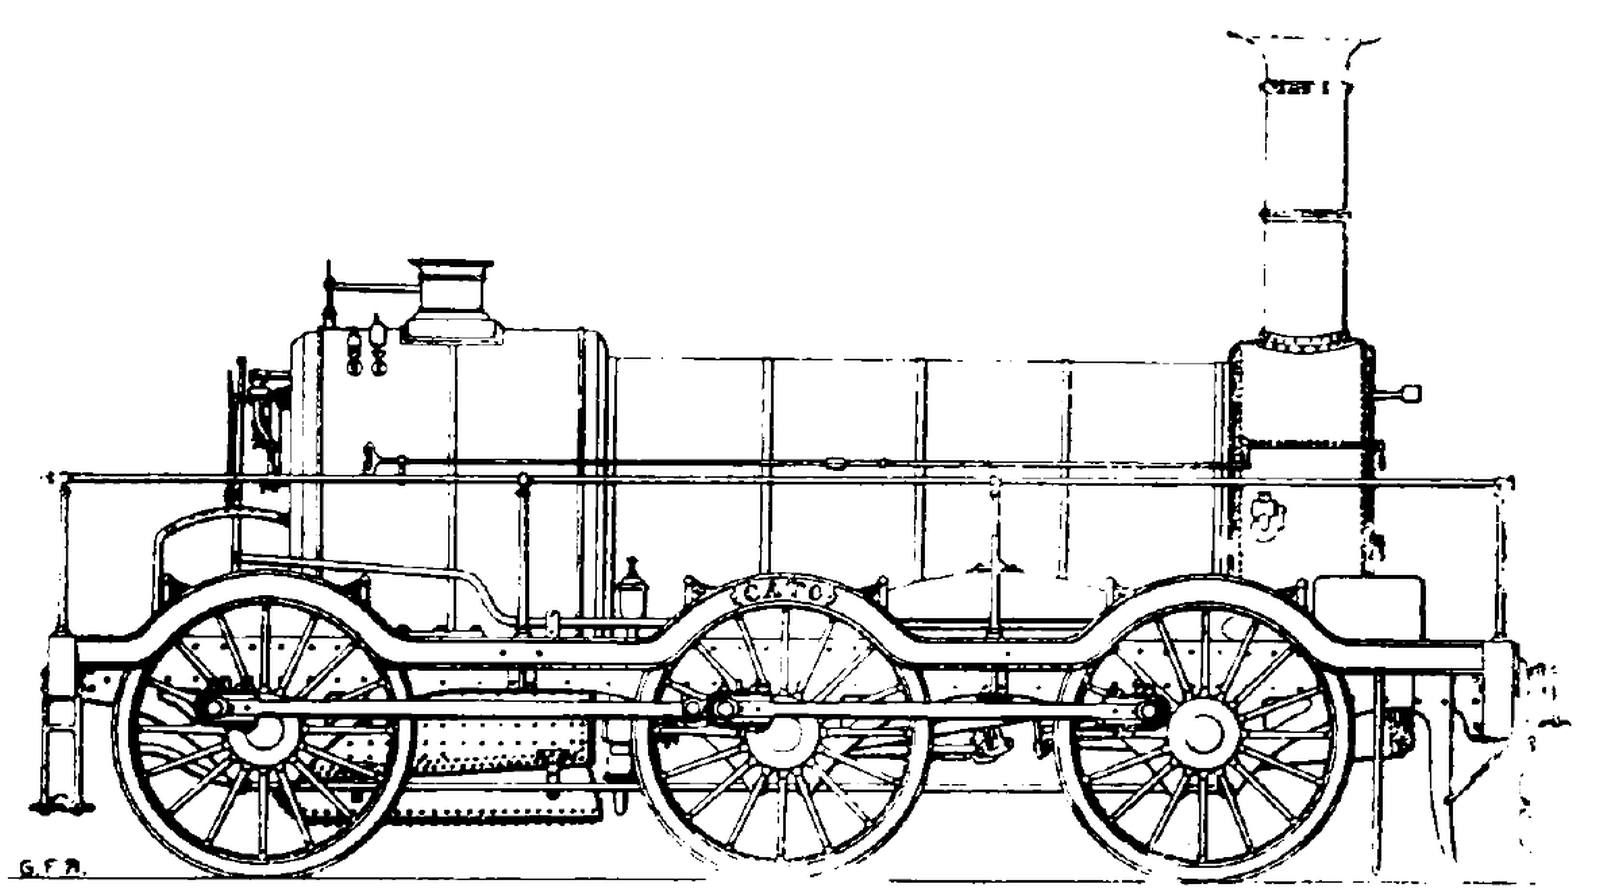 Schematic drawing of “Cato”